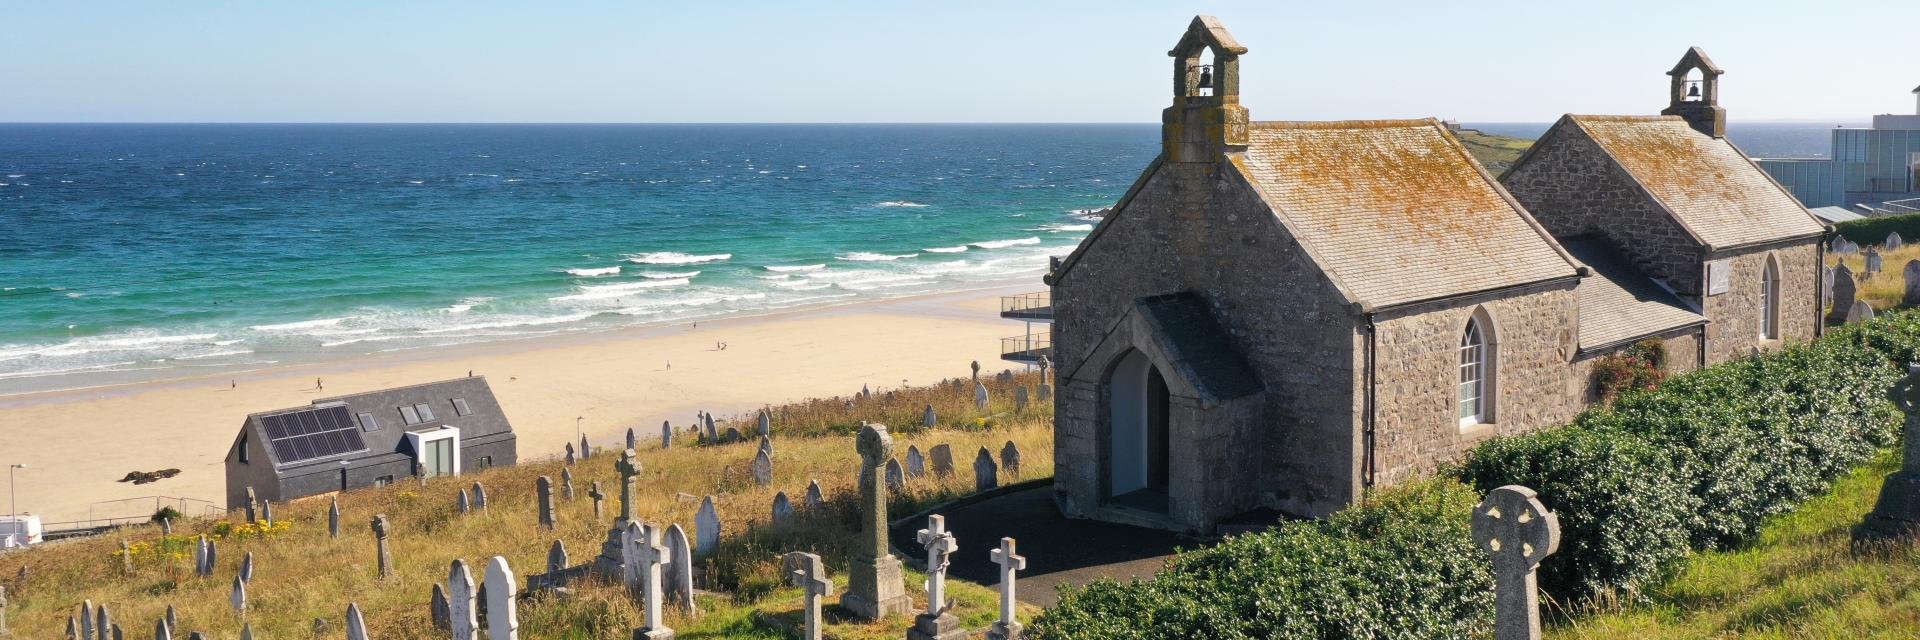 Barnoon Chapel in St Ives overlooking Porthmeor beach